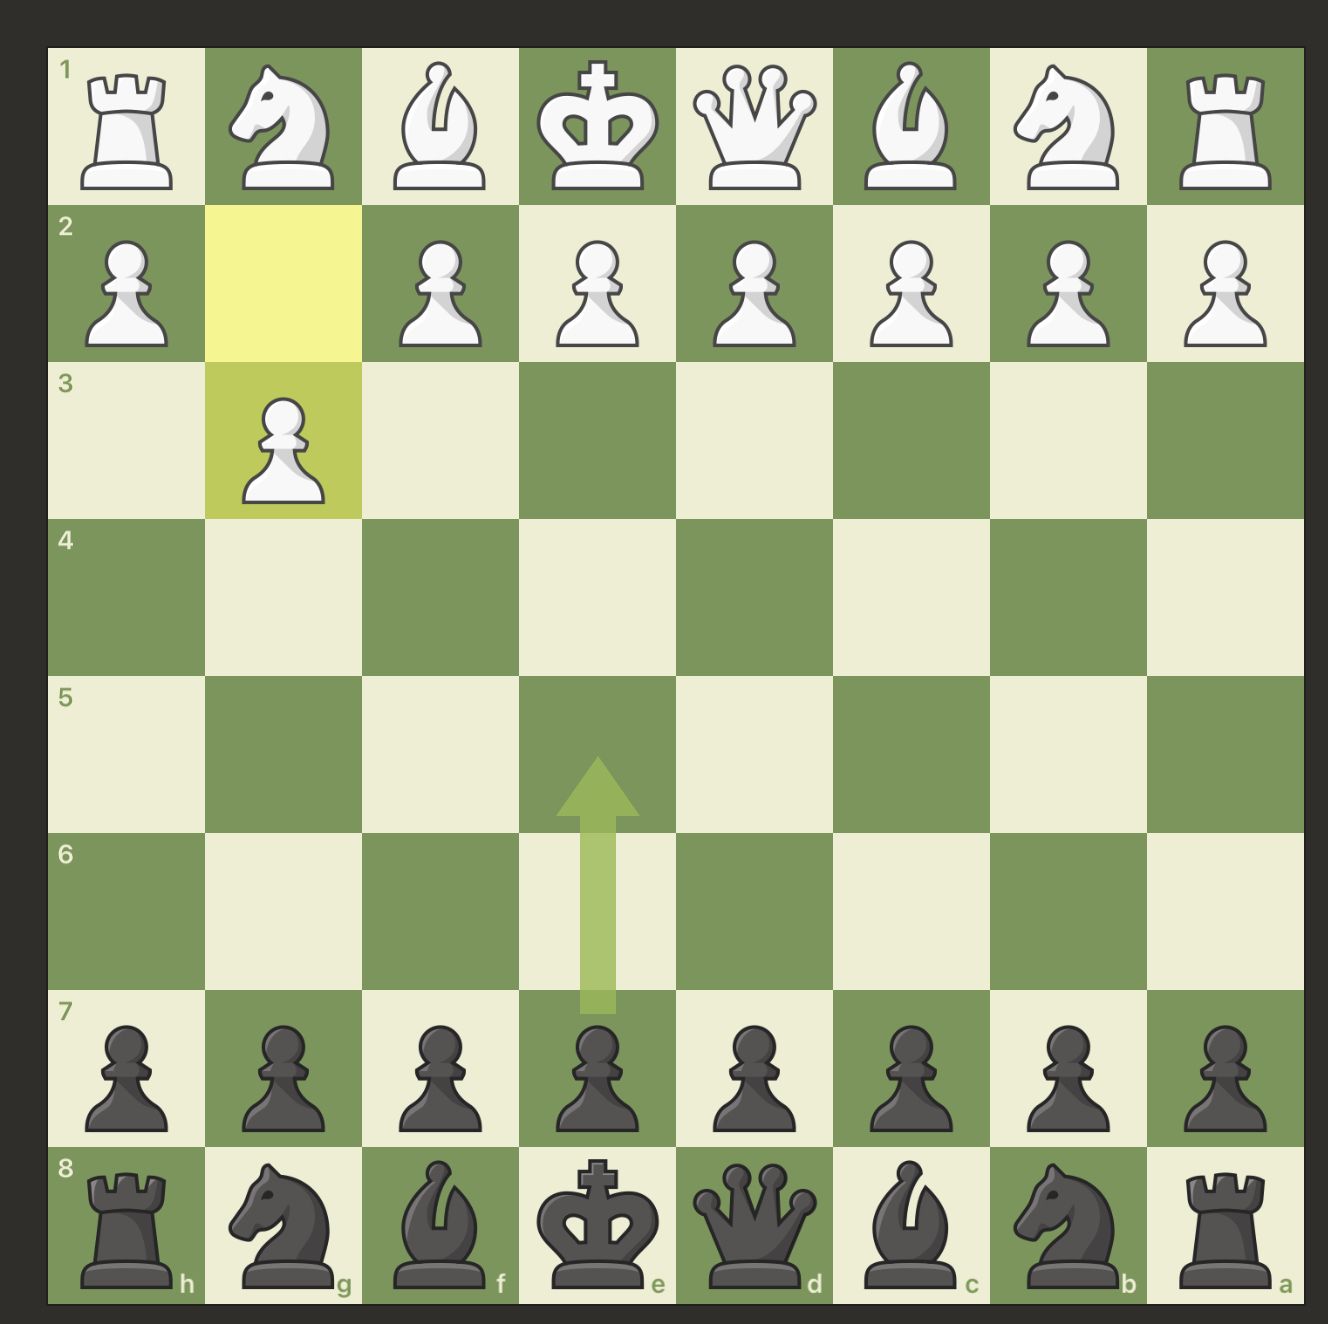 best move arrows in analysis board? - Chess Forums 